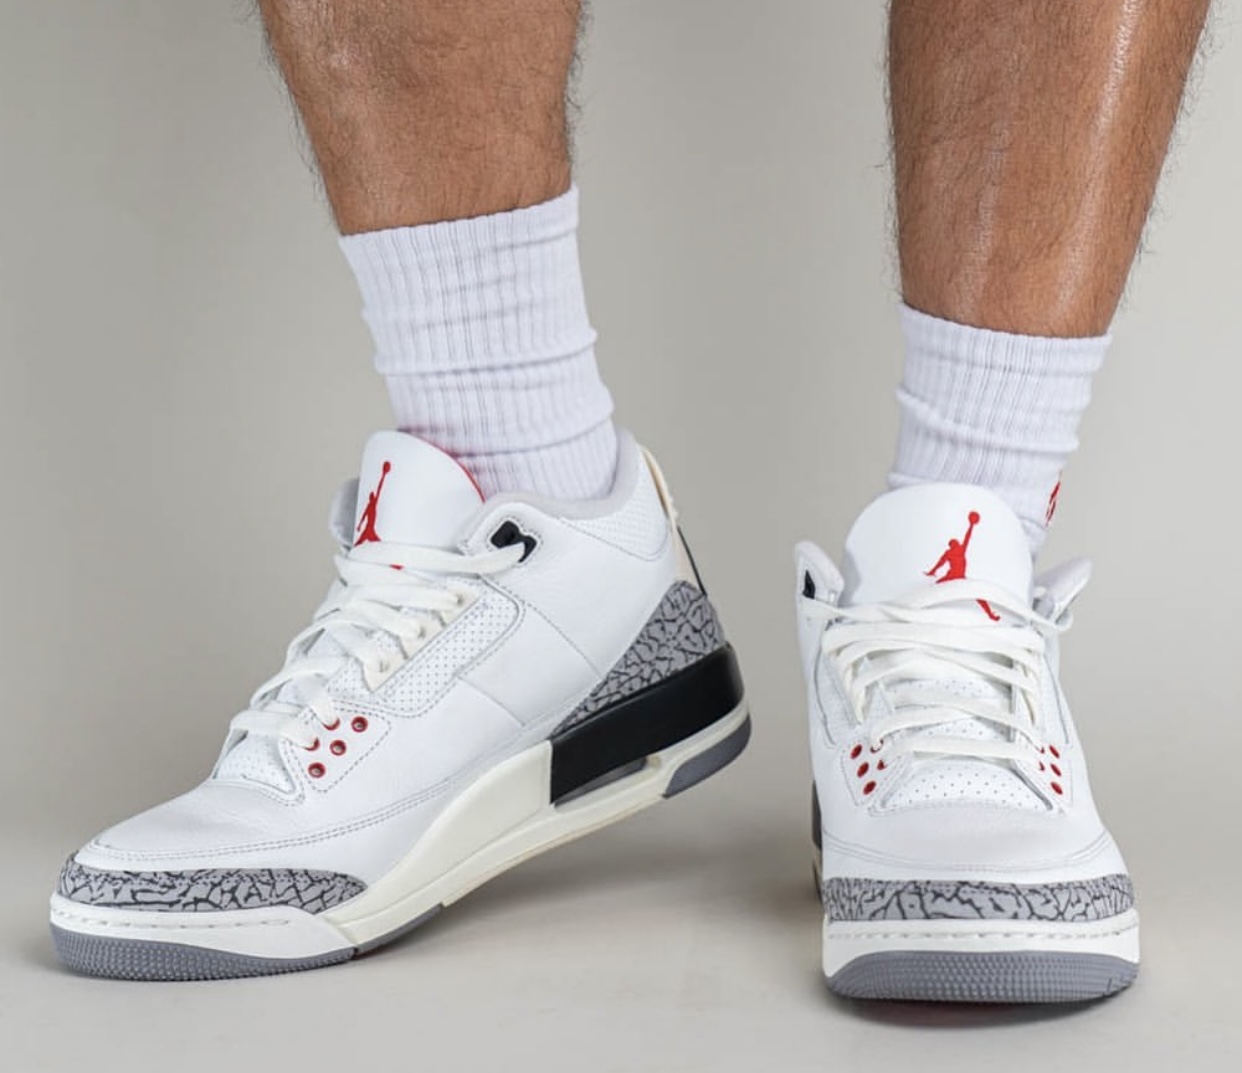 Air Jordan 3 White Cement Reimagined DN3707-100 Release Date On-Feet Front